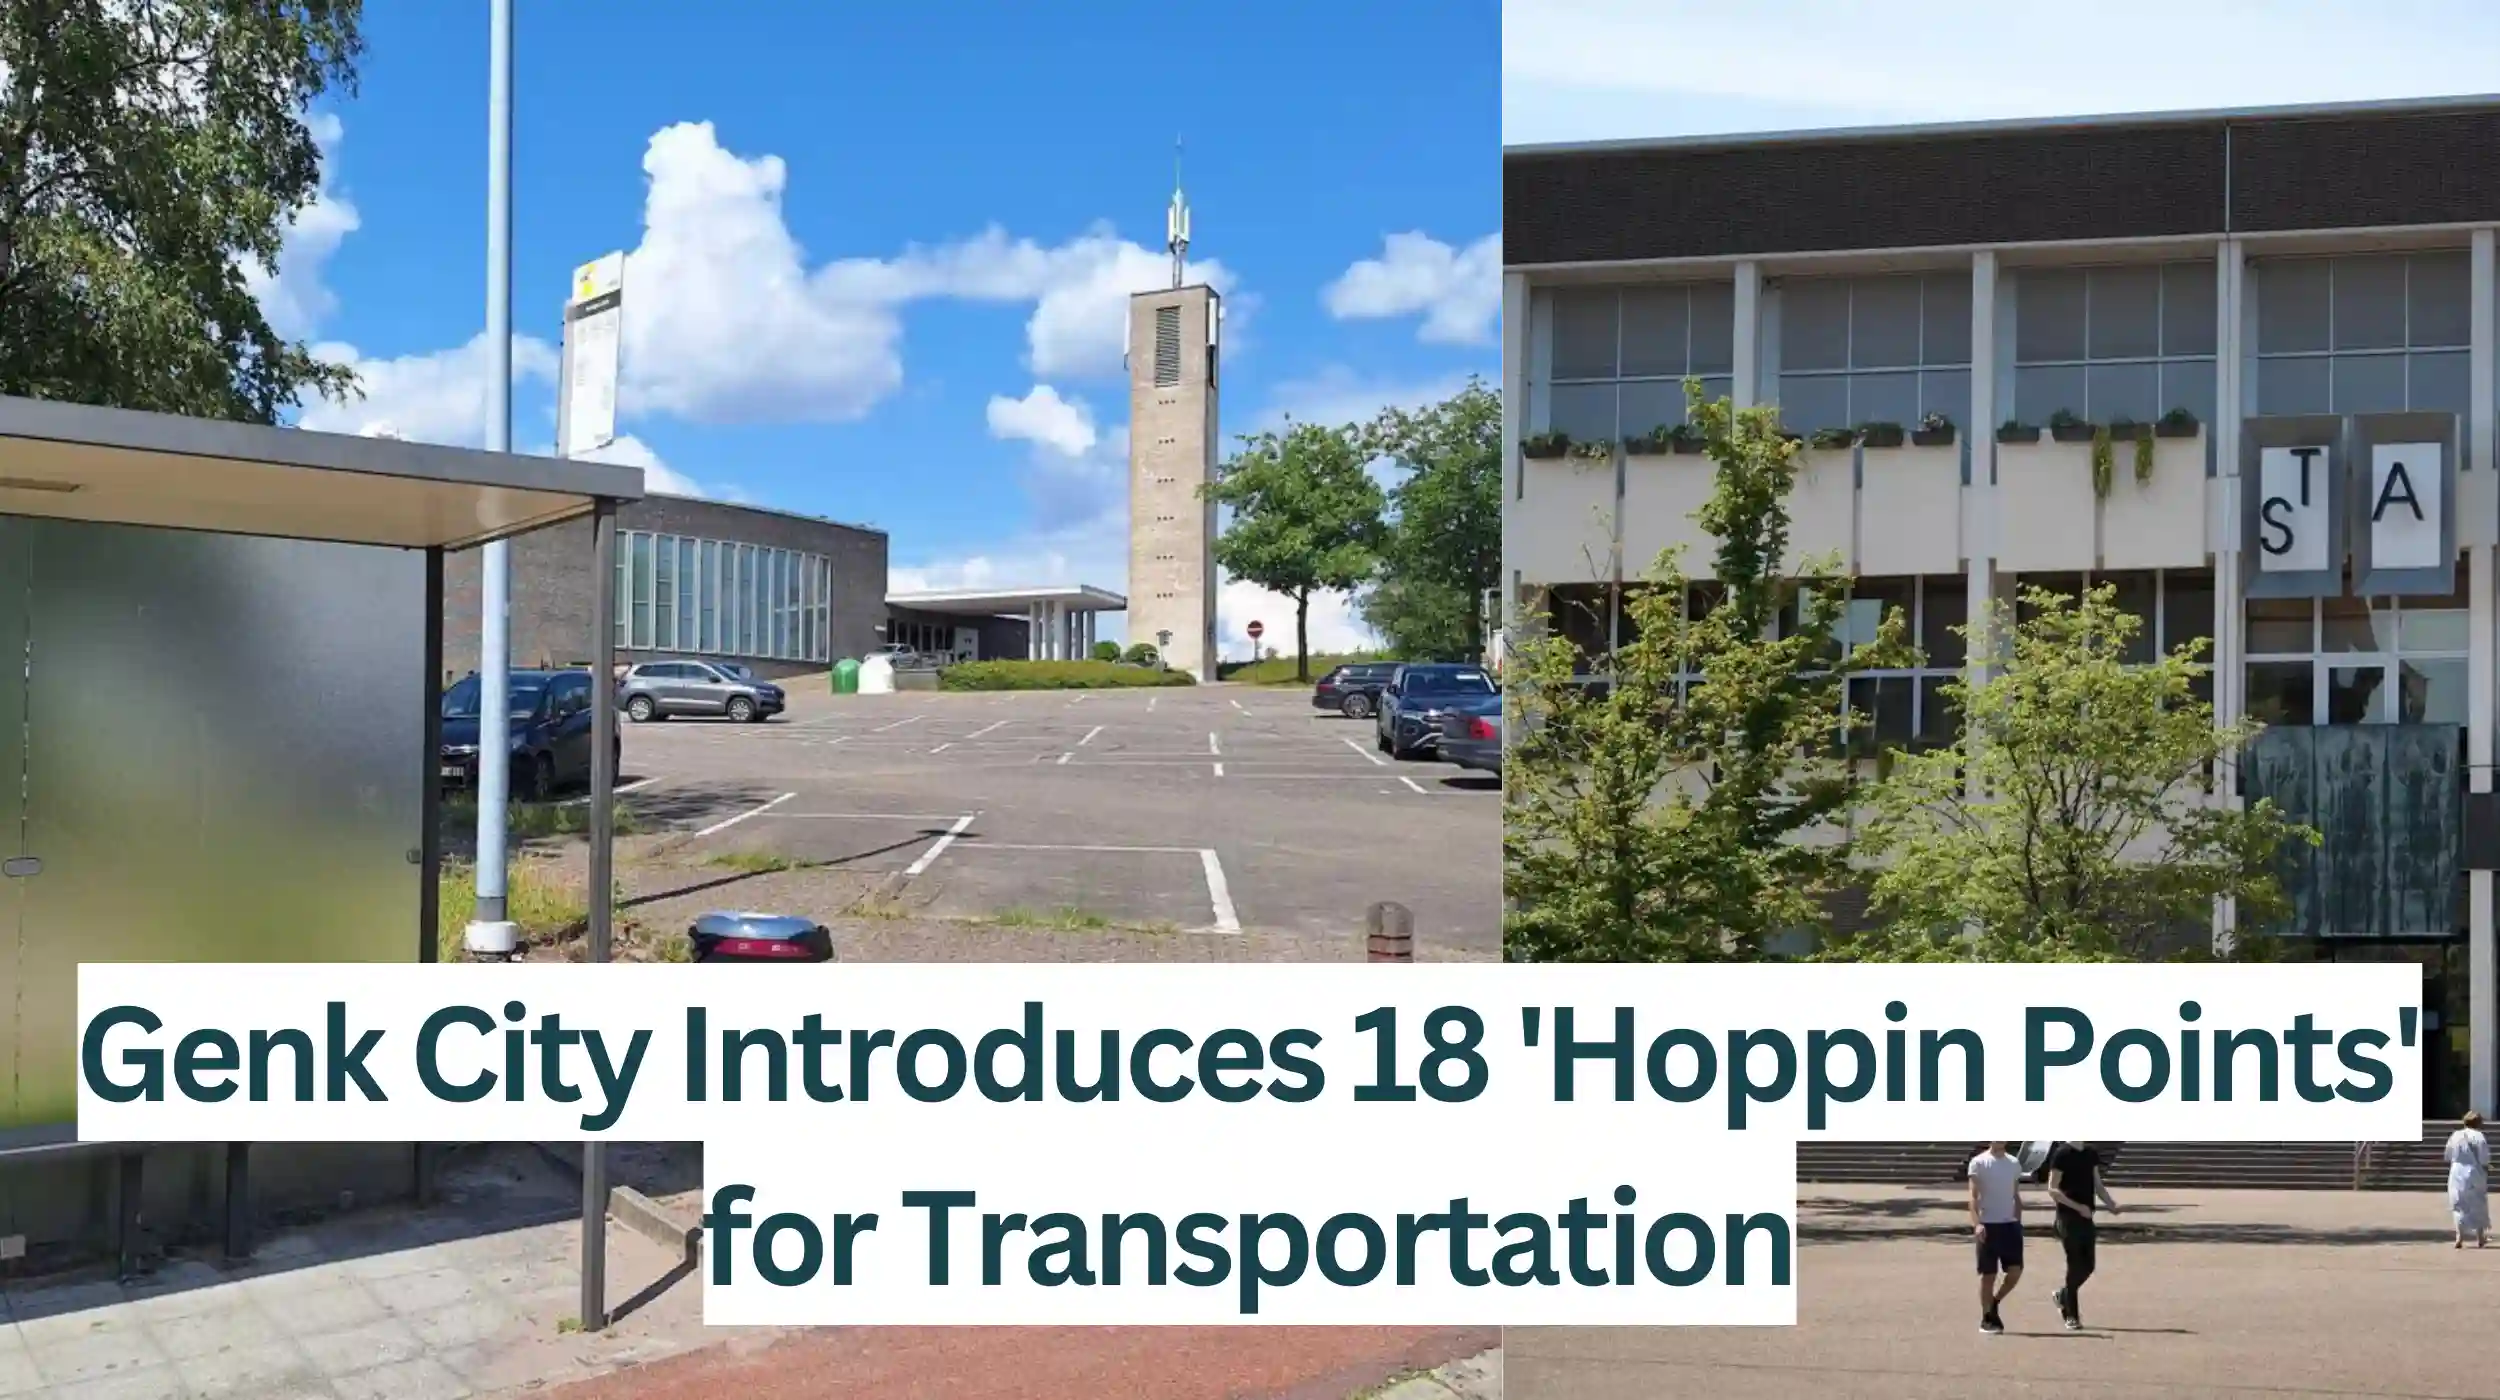 enk-City-Introduces-18-Hoppin-Points-for-Transportation.